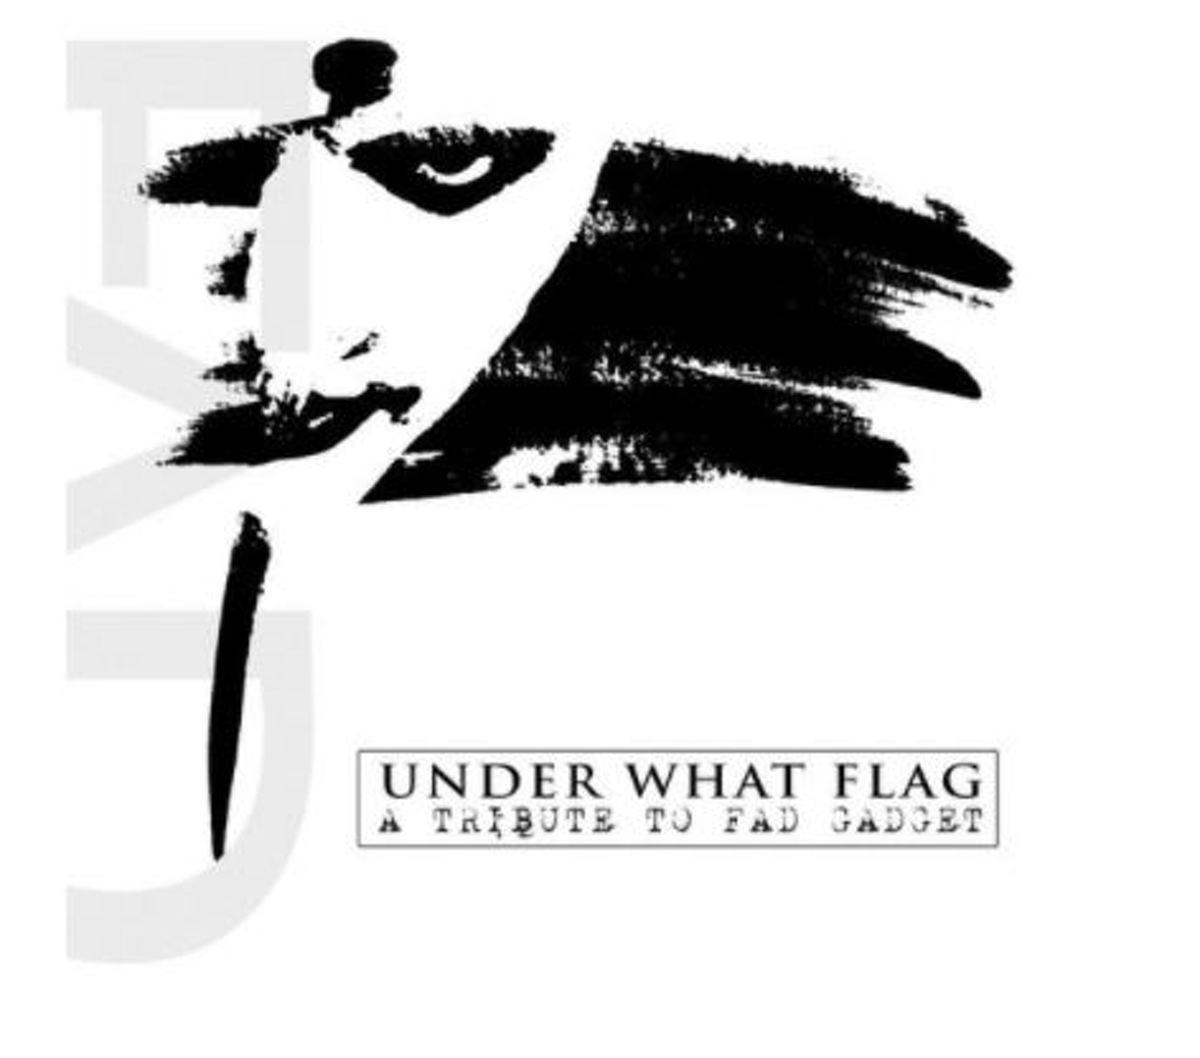 To Fad - Under What (CD) Flag-A VARIOUS Tribute - Gadget